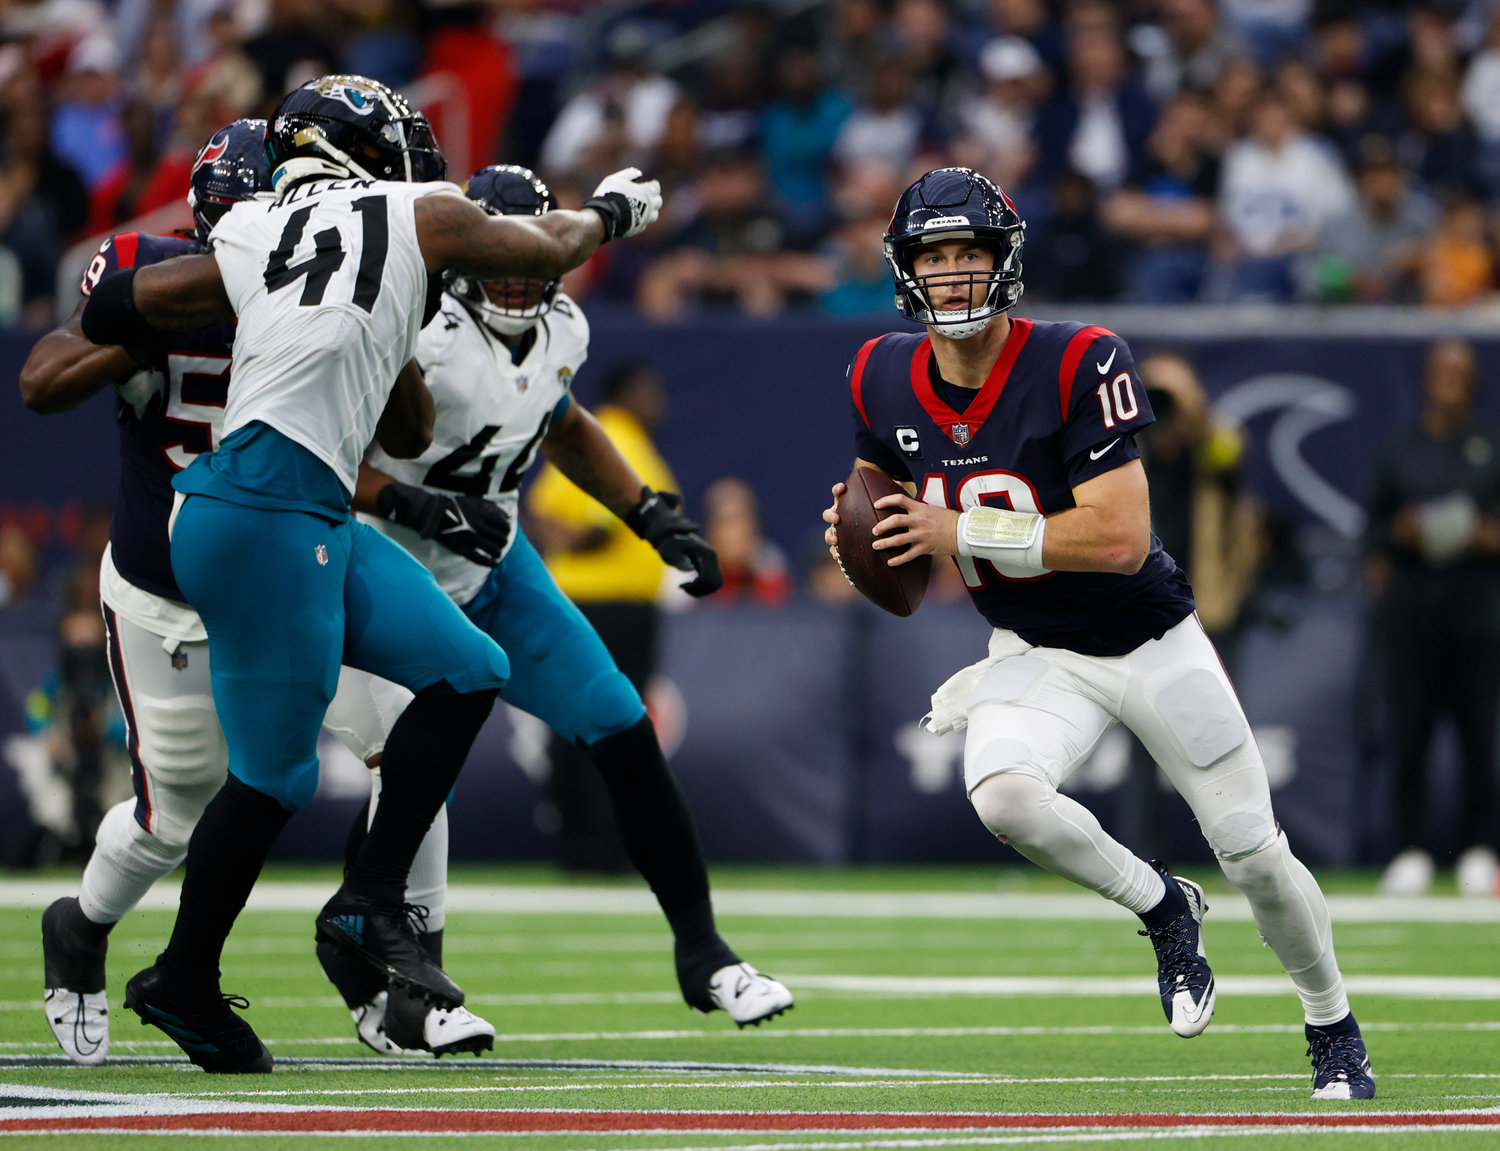 Texans quarterback Davis Mills (10) scrambles and looks downfield for a running lane during an NFL game between the Houston Texans and the Jacksonville Jaguars on Jan. 1, 2023 in Houston. The Jaguars won, 31-3.